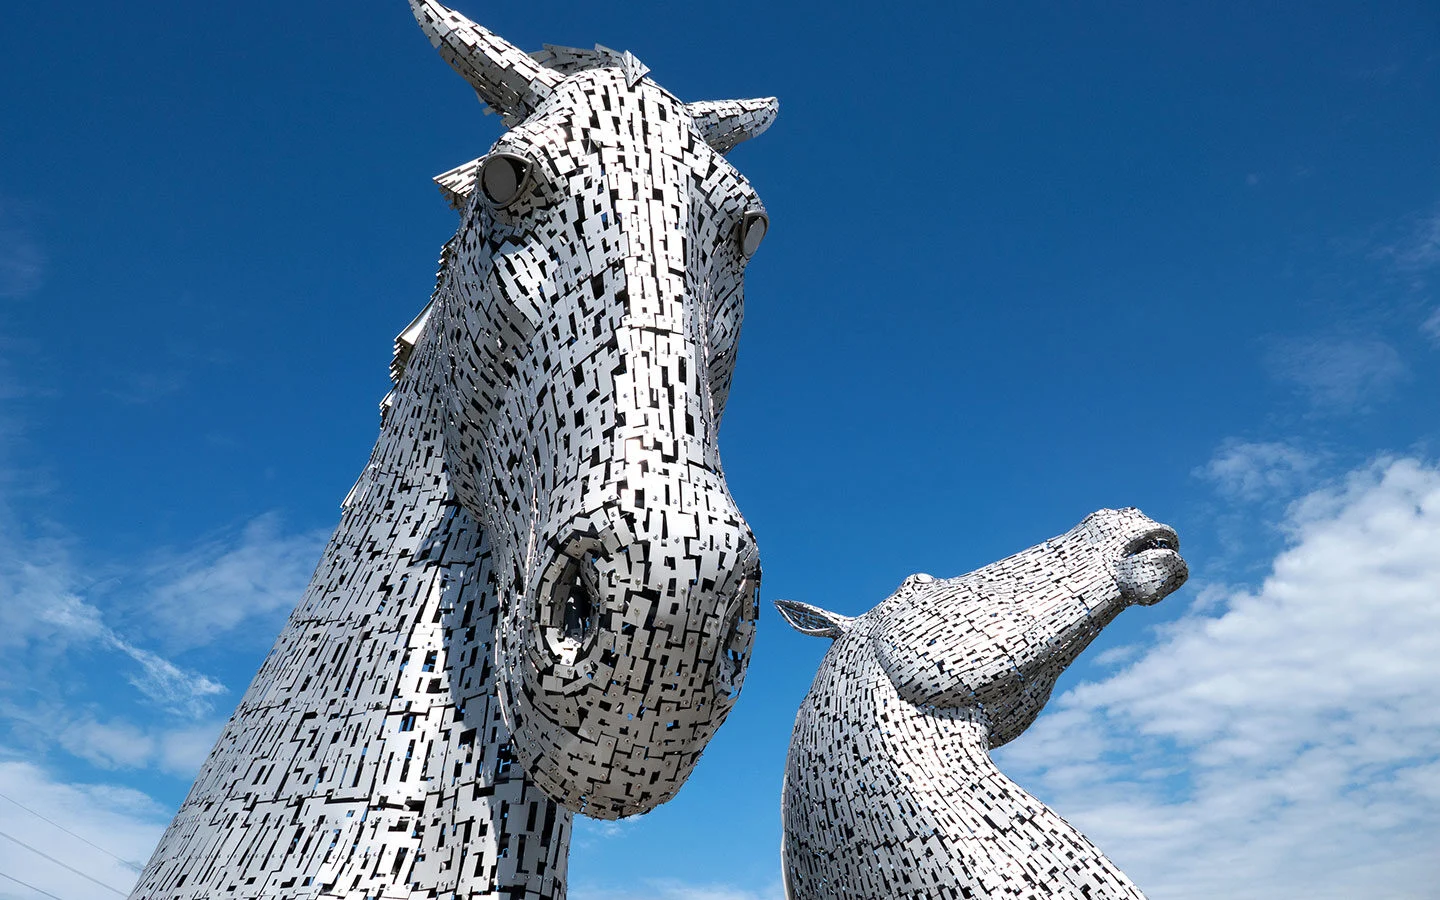 The Kelpies statues in Falkirk on a day trip from Edinburgh